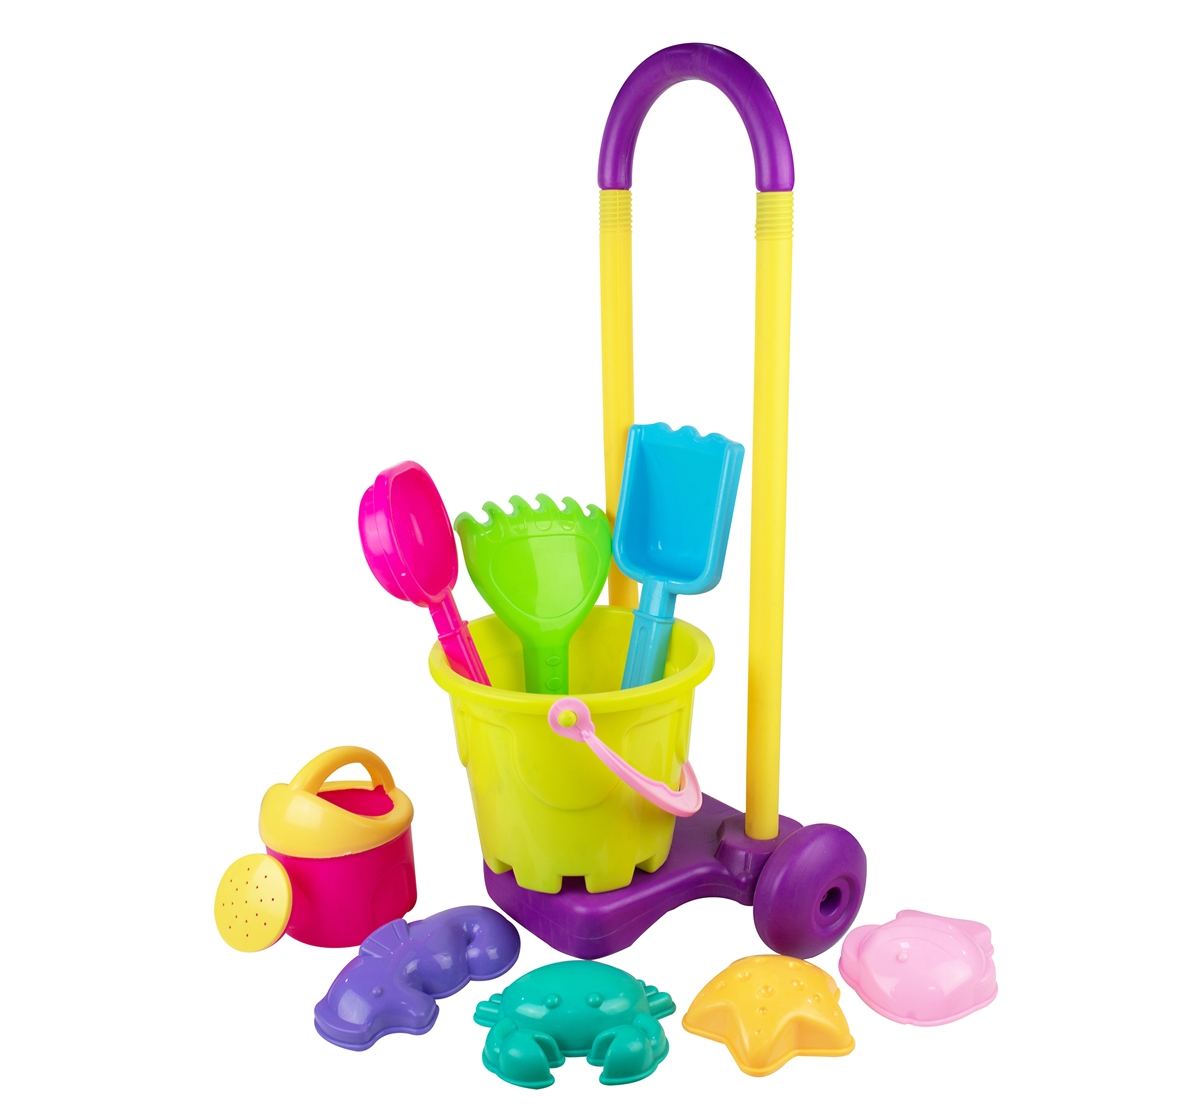 Zoozi | Zoozi Beach set with Trolley for kids Multicolor 18M+